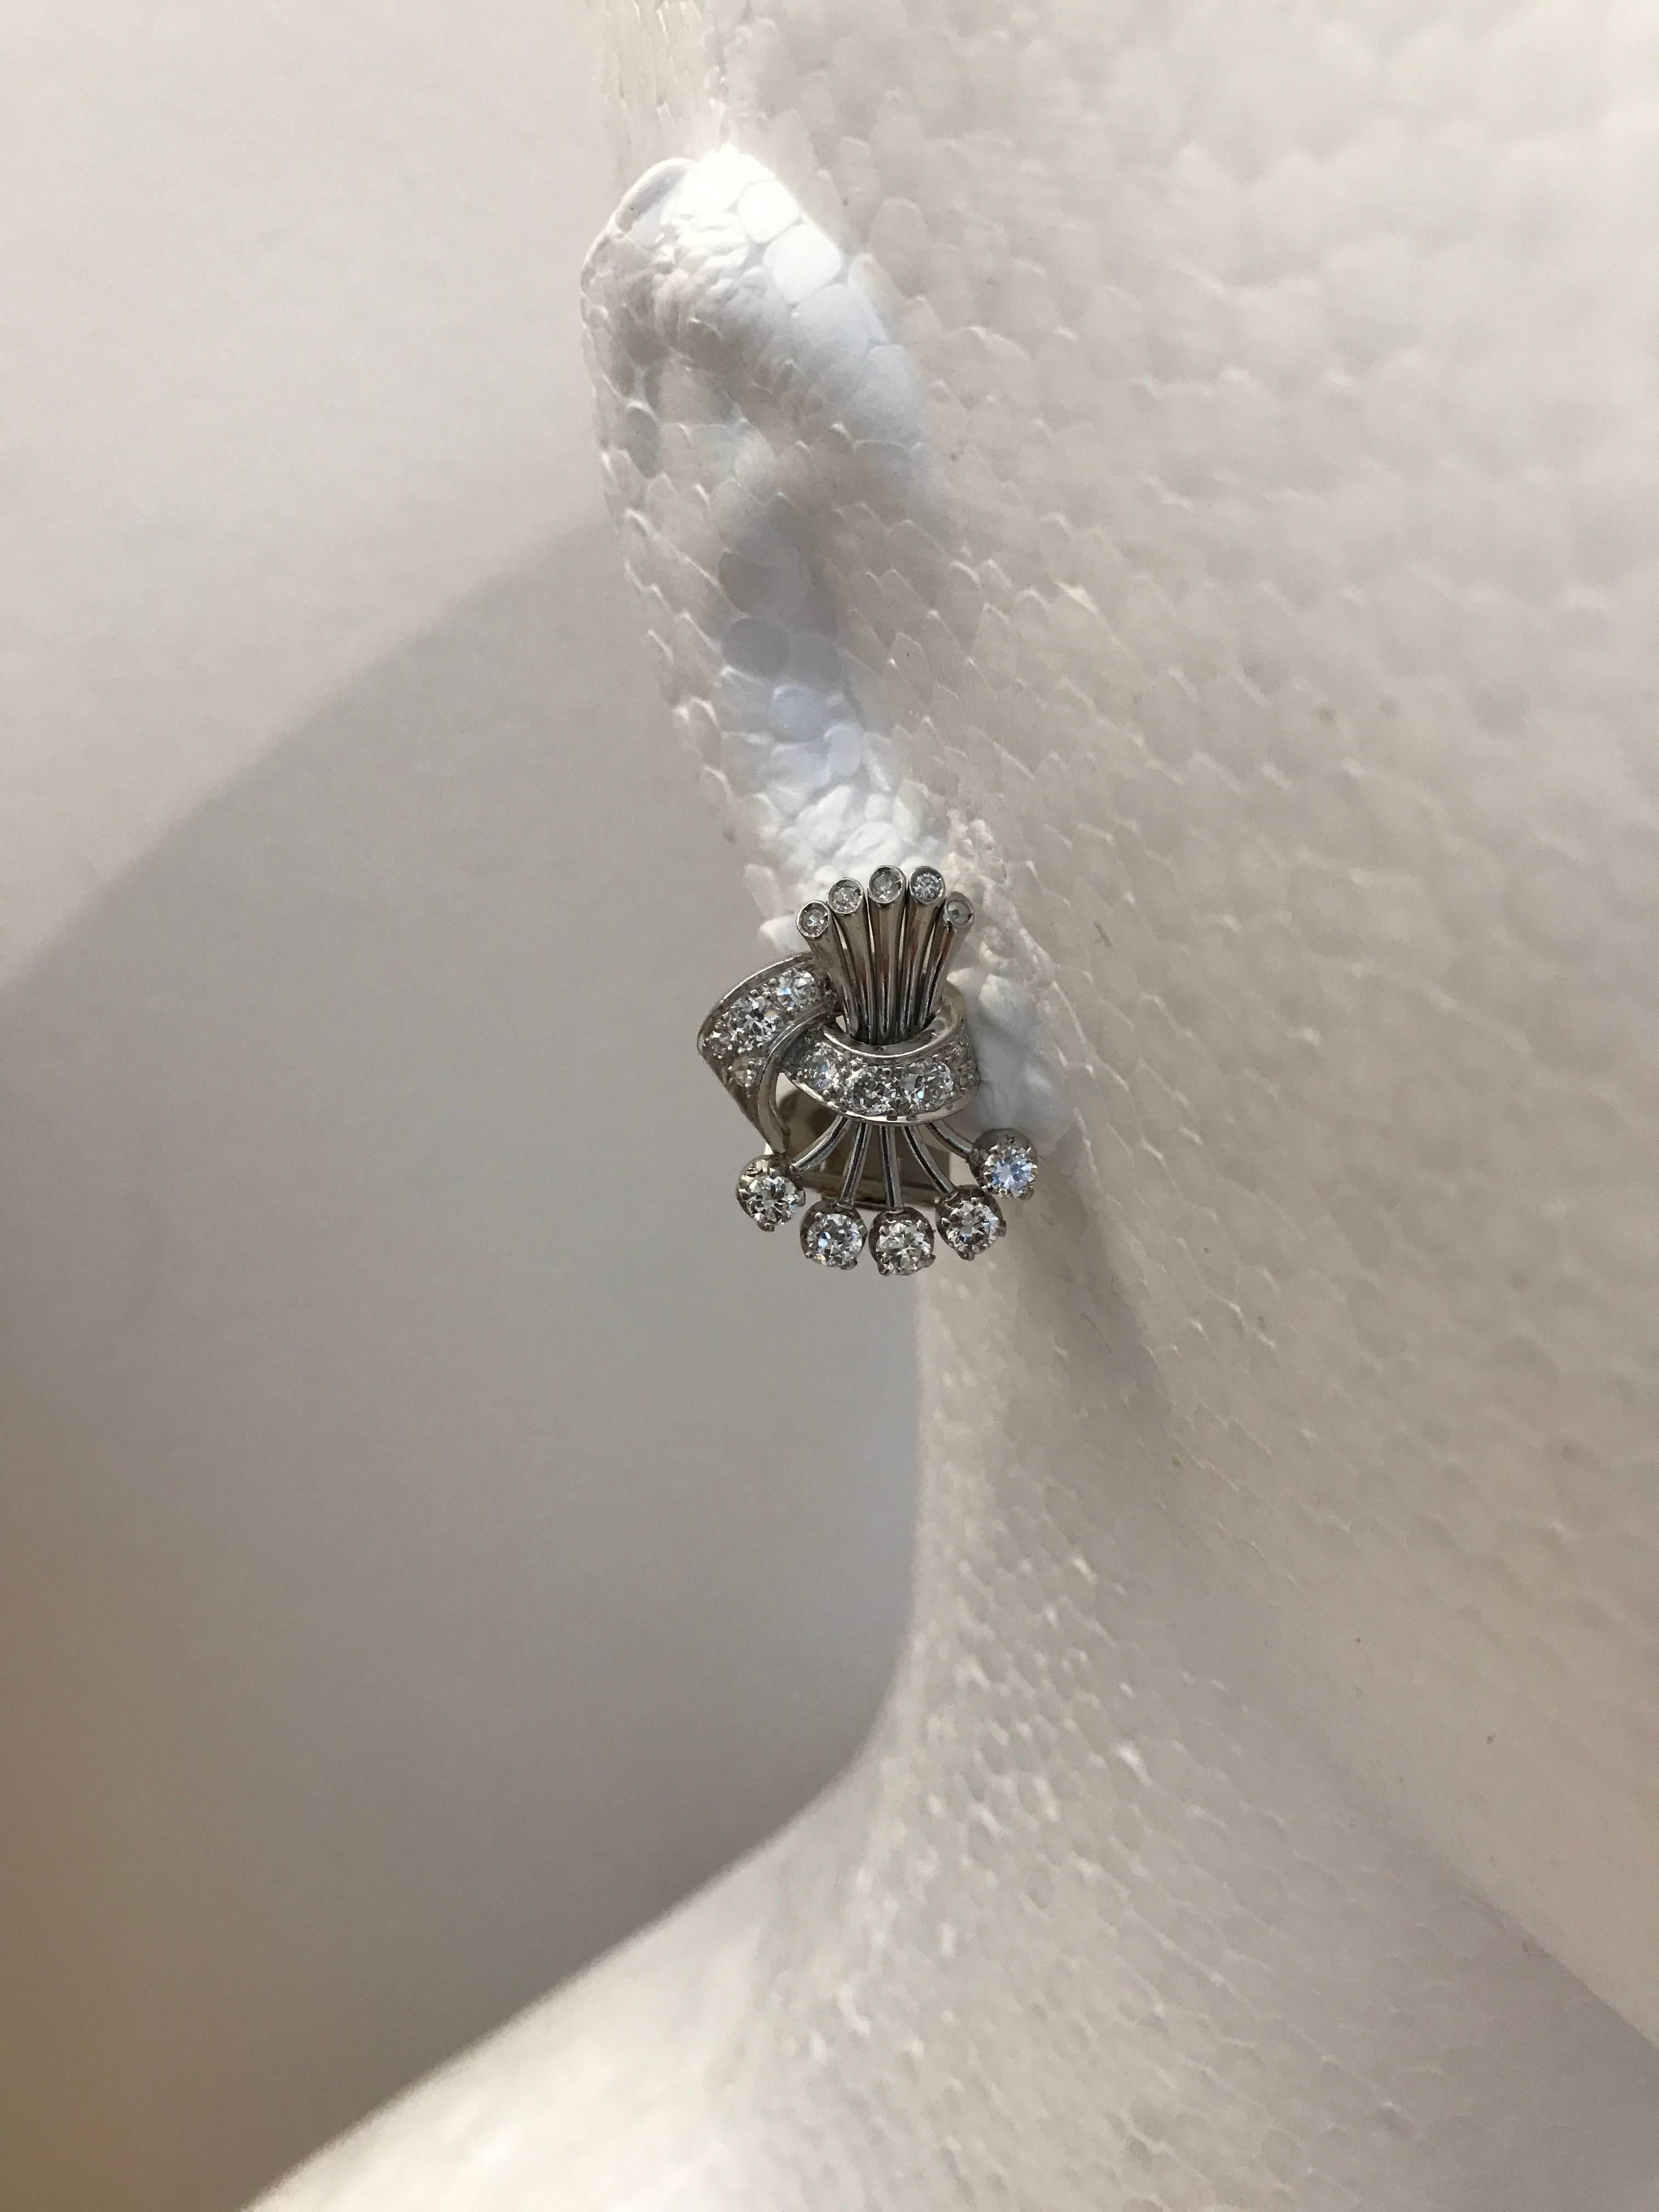 An extremely chic pair of brilliant cut diamond earrings set in platinum and 18ct white gold, made circa 1950

Weight of diamonds 2 carats approximately

Length of earrings 2cms approximately